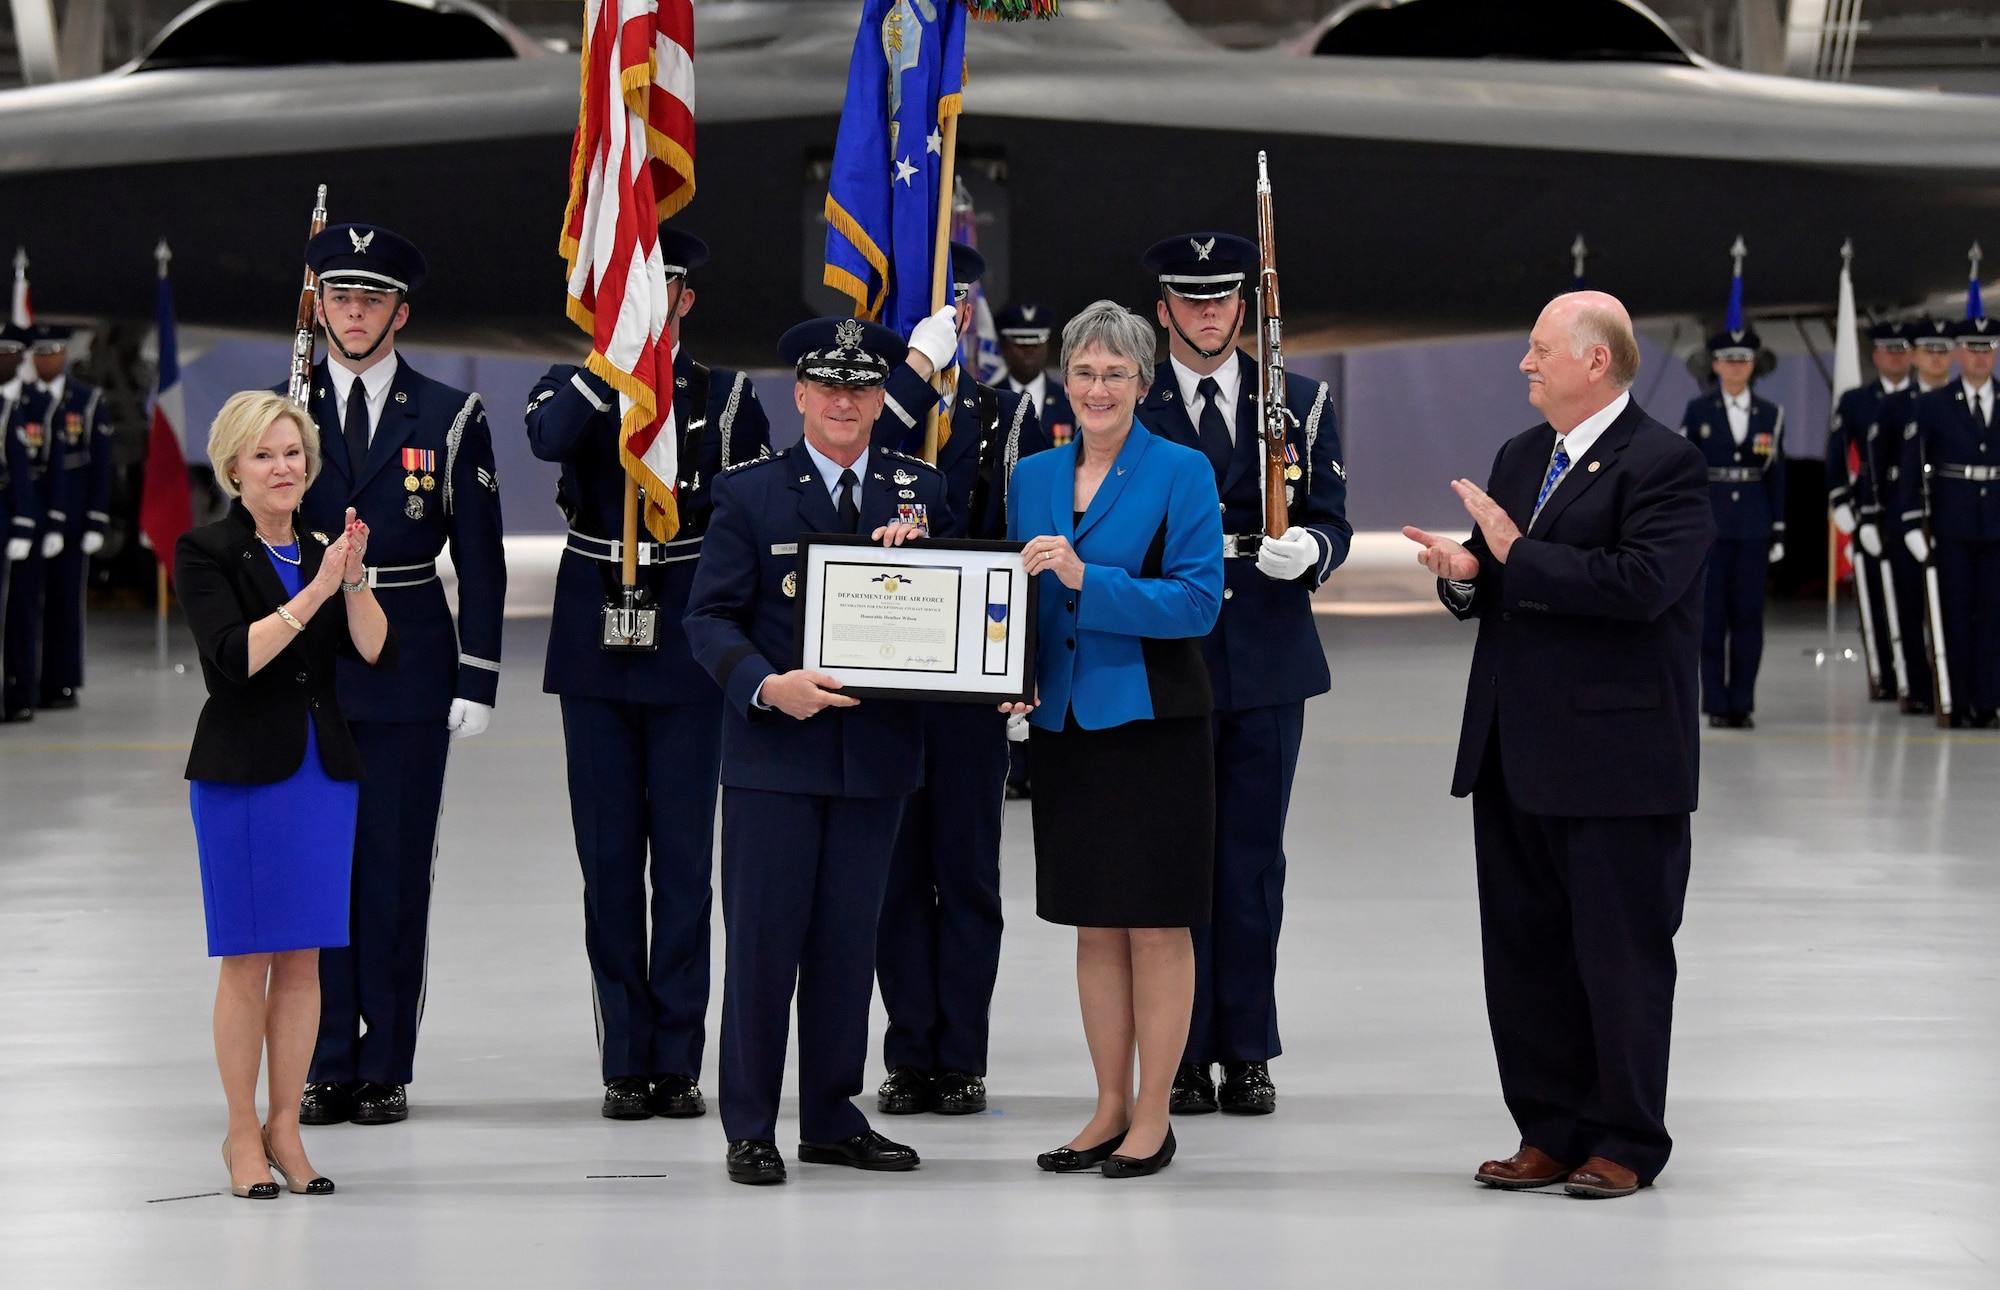 Secretary of the Air Force Heather Wilson receives the Exceptional Civilian Service Award during her farewell ceremony at Joint Base Andrews, Maryland, May 21, 2019.